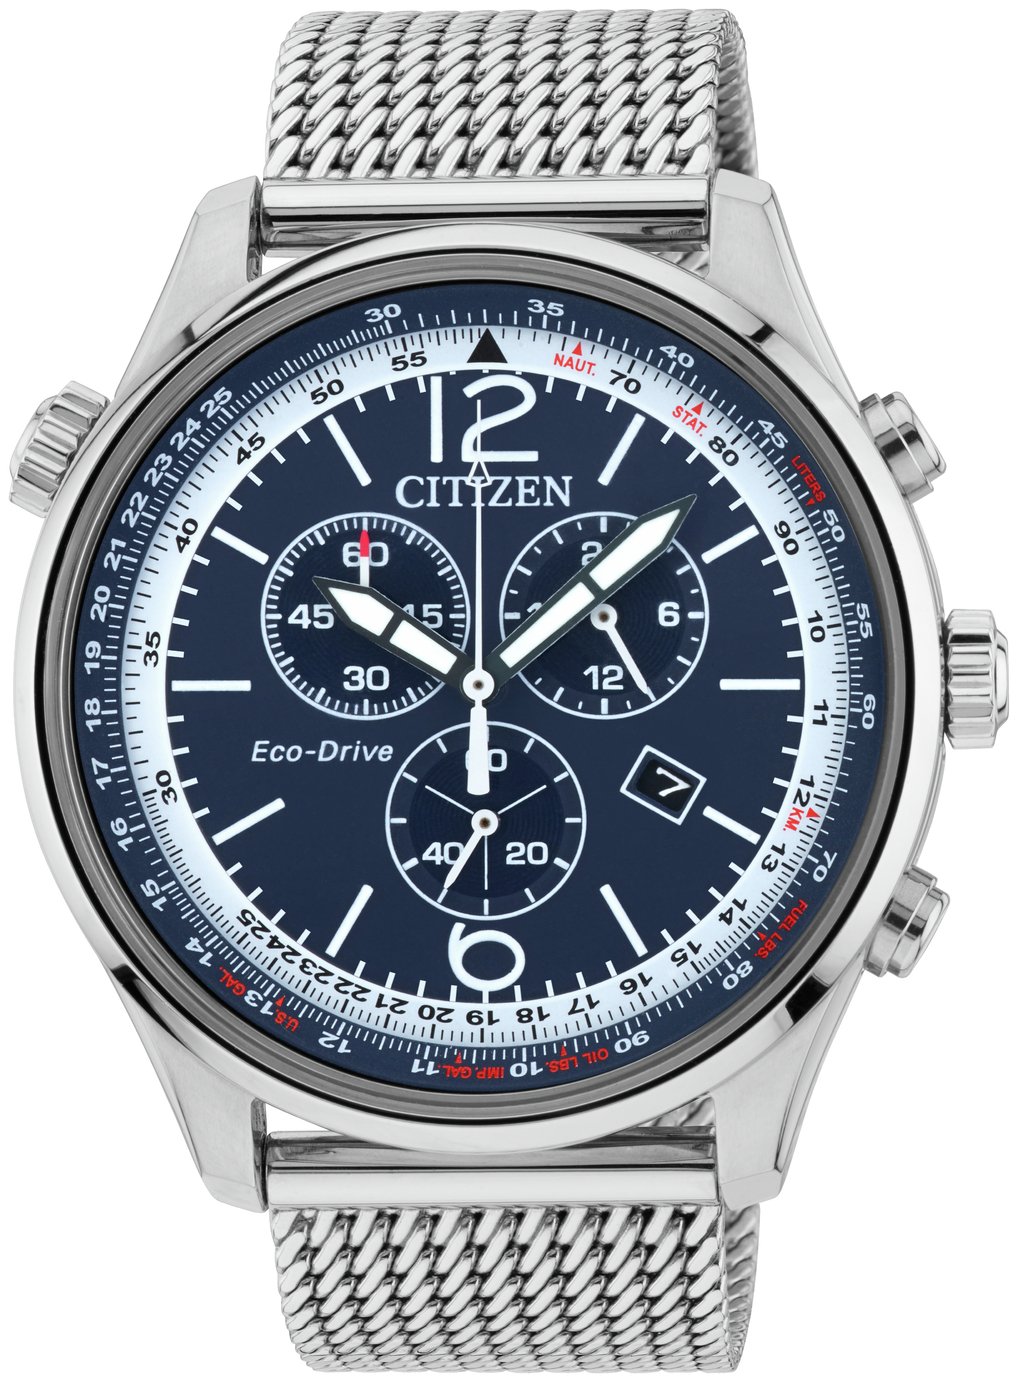 Citizen Eco-Drive Men's Stainless Steel Chronograph Watch (5385878 Citizen Men's Eco Drive Stainless Steel